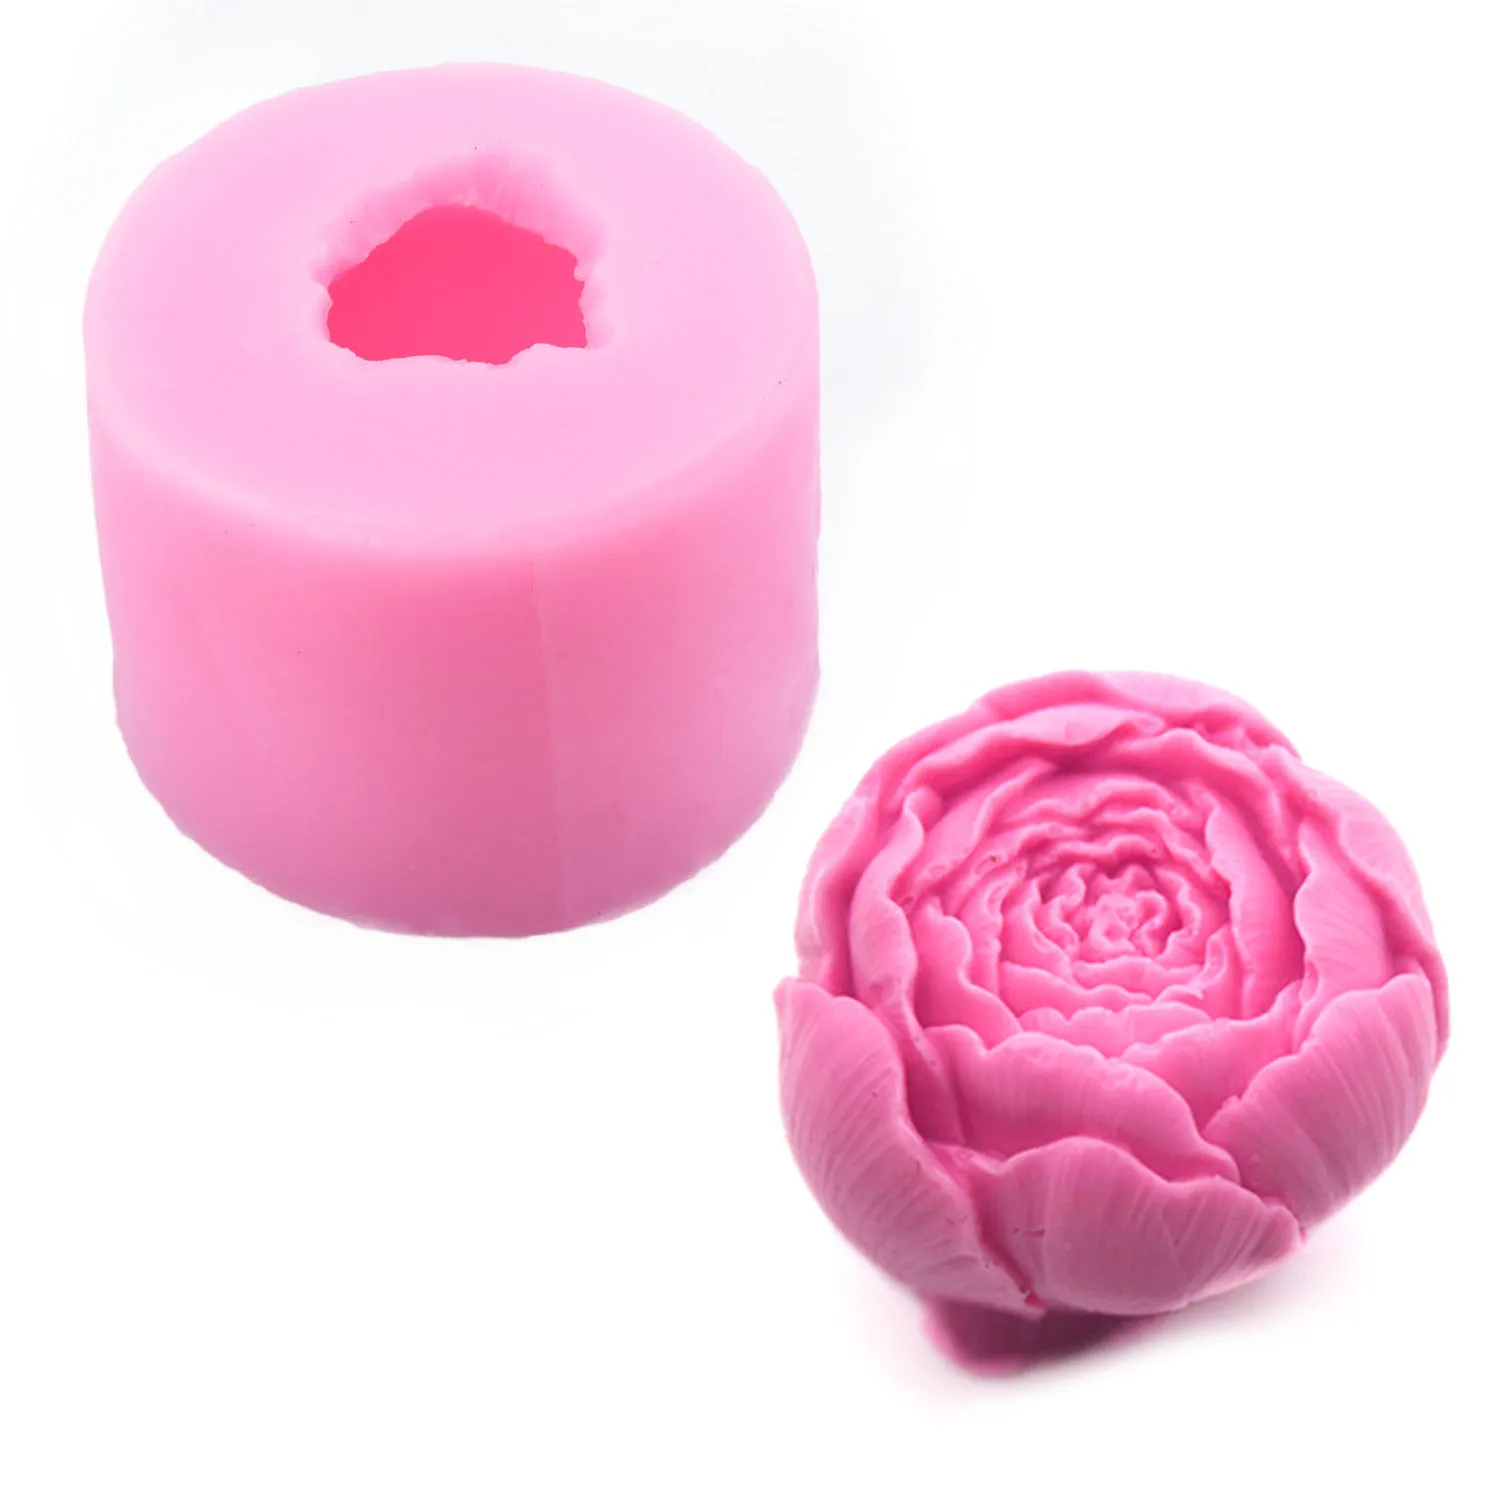 Silicone 3D Rose Flower Fondant Cake Chocolate Mold Mould Modelling Decor HS3 